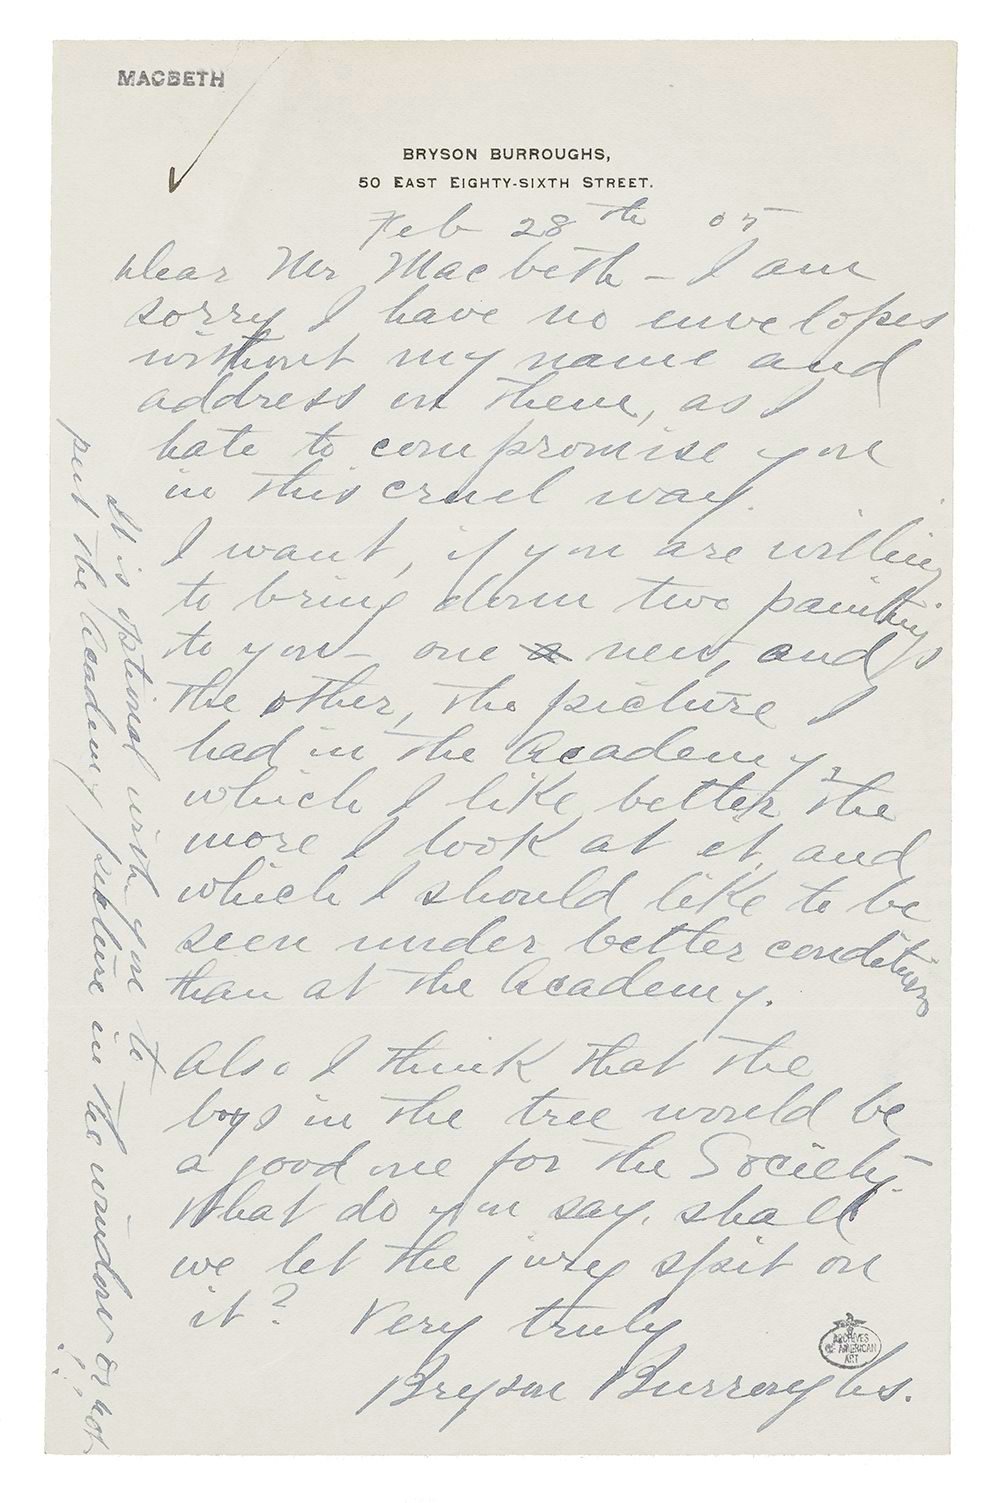 Letter to William Macbeth from Bryson Burroughs